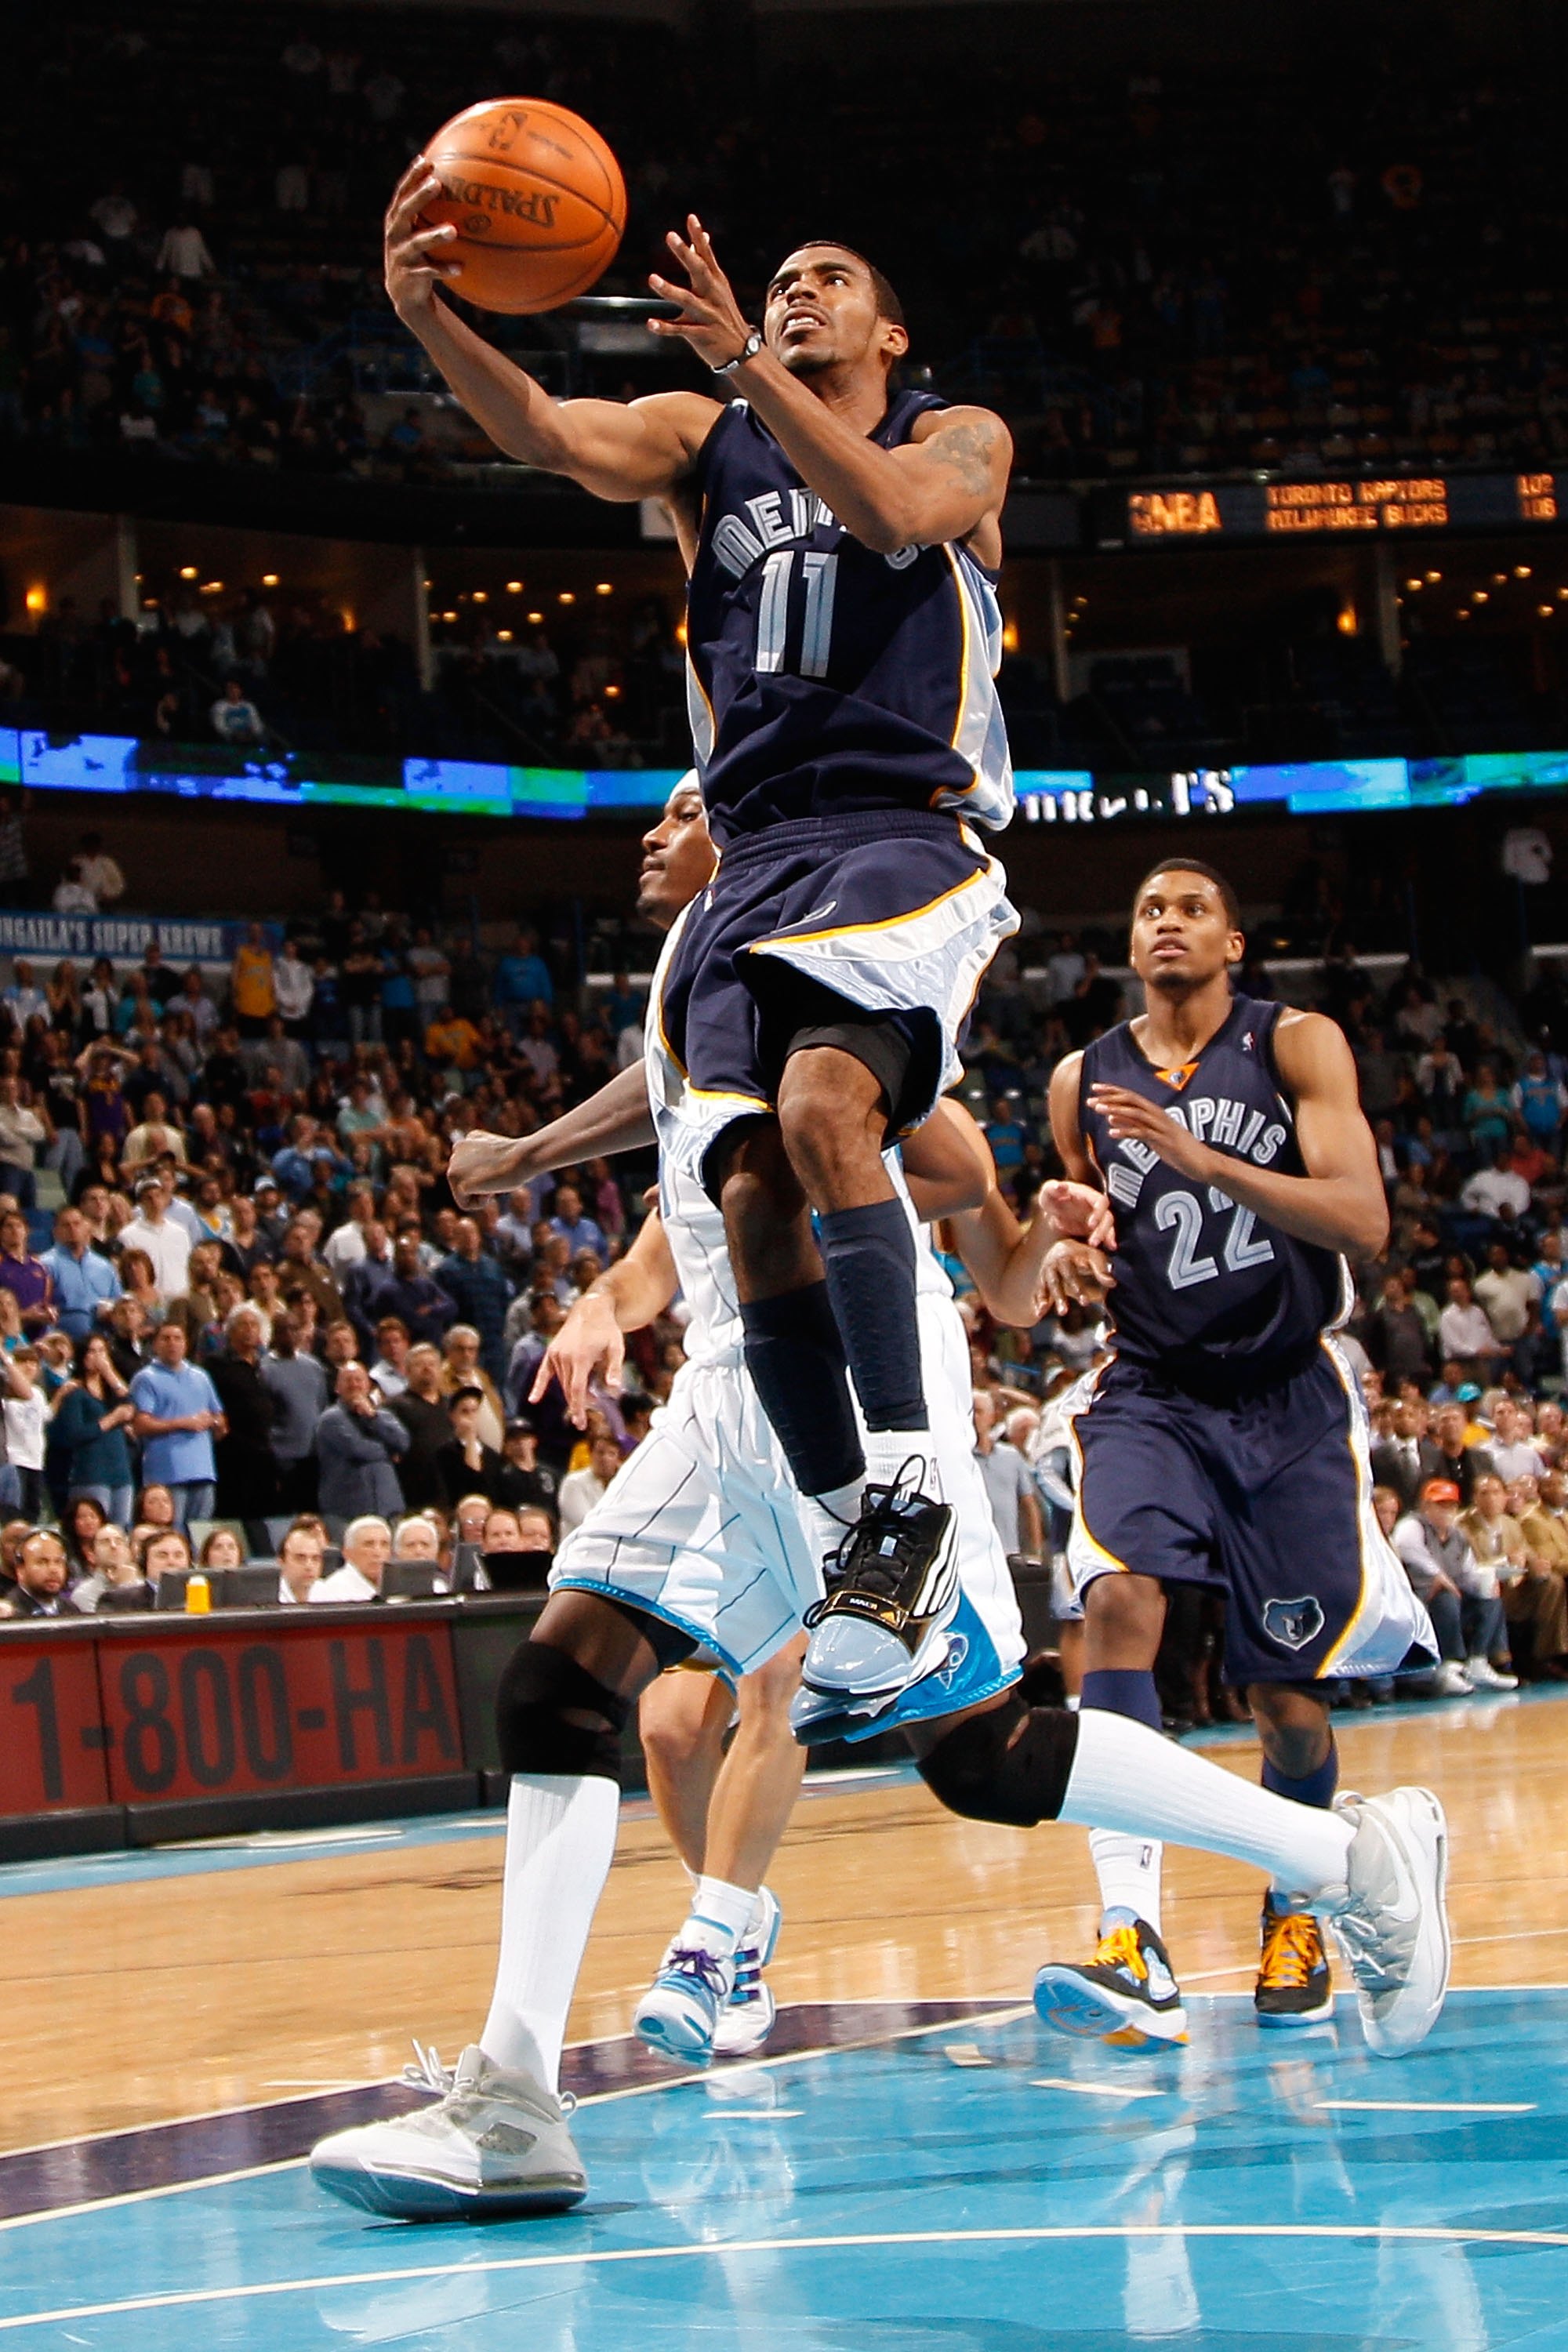 NEW ORLEANS - JANUARY 20:  Mike Conley #11 of the Memphis Grizzlies shoots the ball against the New Orleans Hornets at the New Orleans Arena on January 20, 2010 in New Orleans, Louisiana.  NOTE TO USER: User expressly acknowledges and agrees that, by down